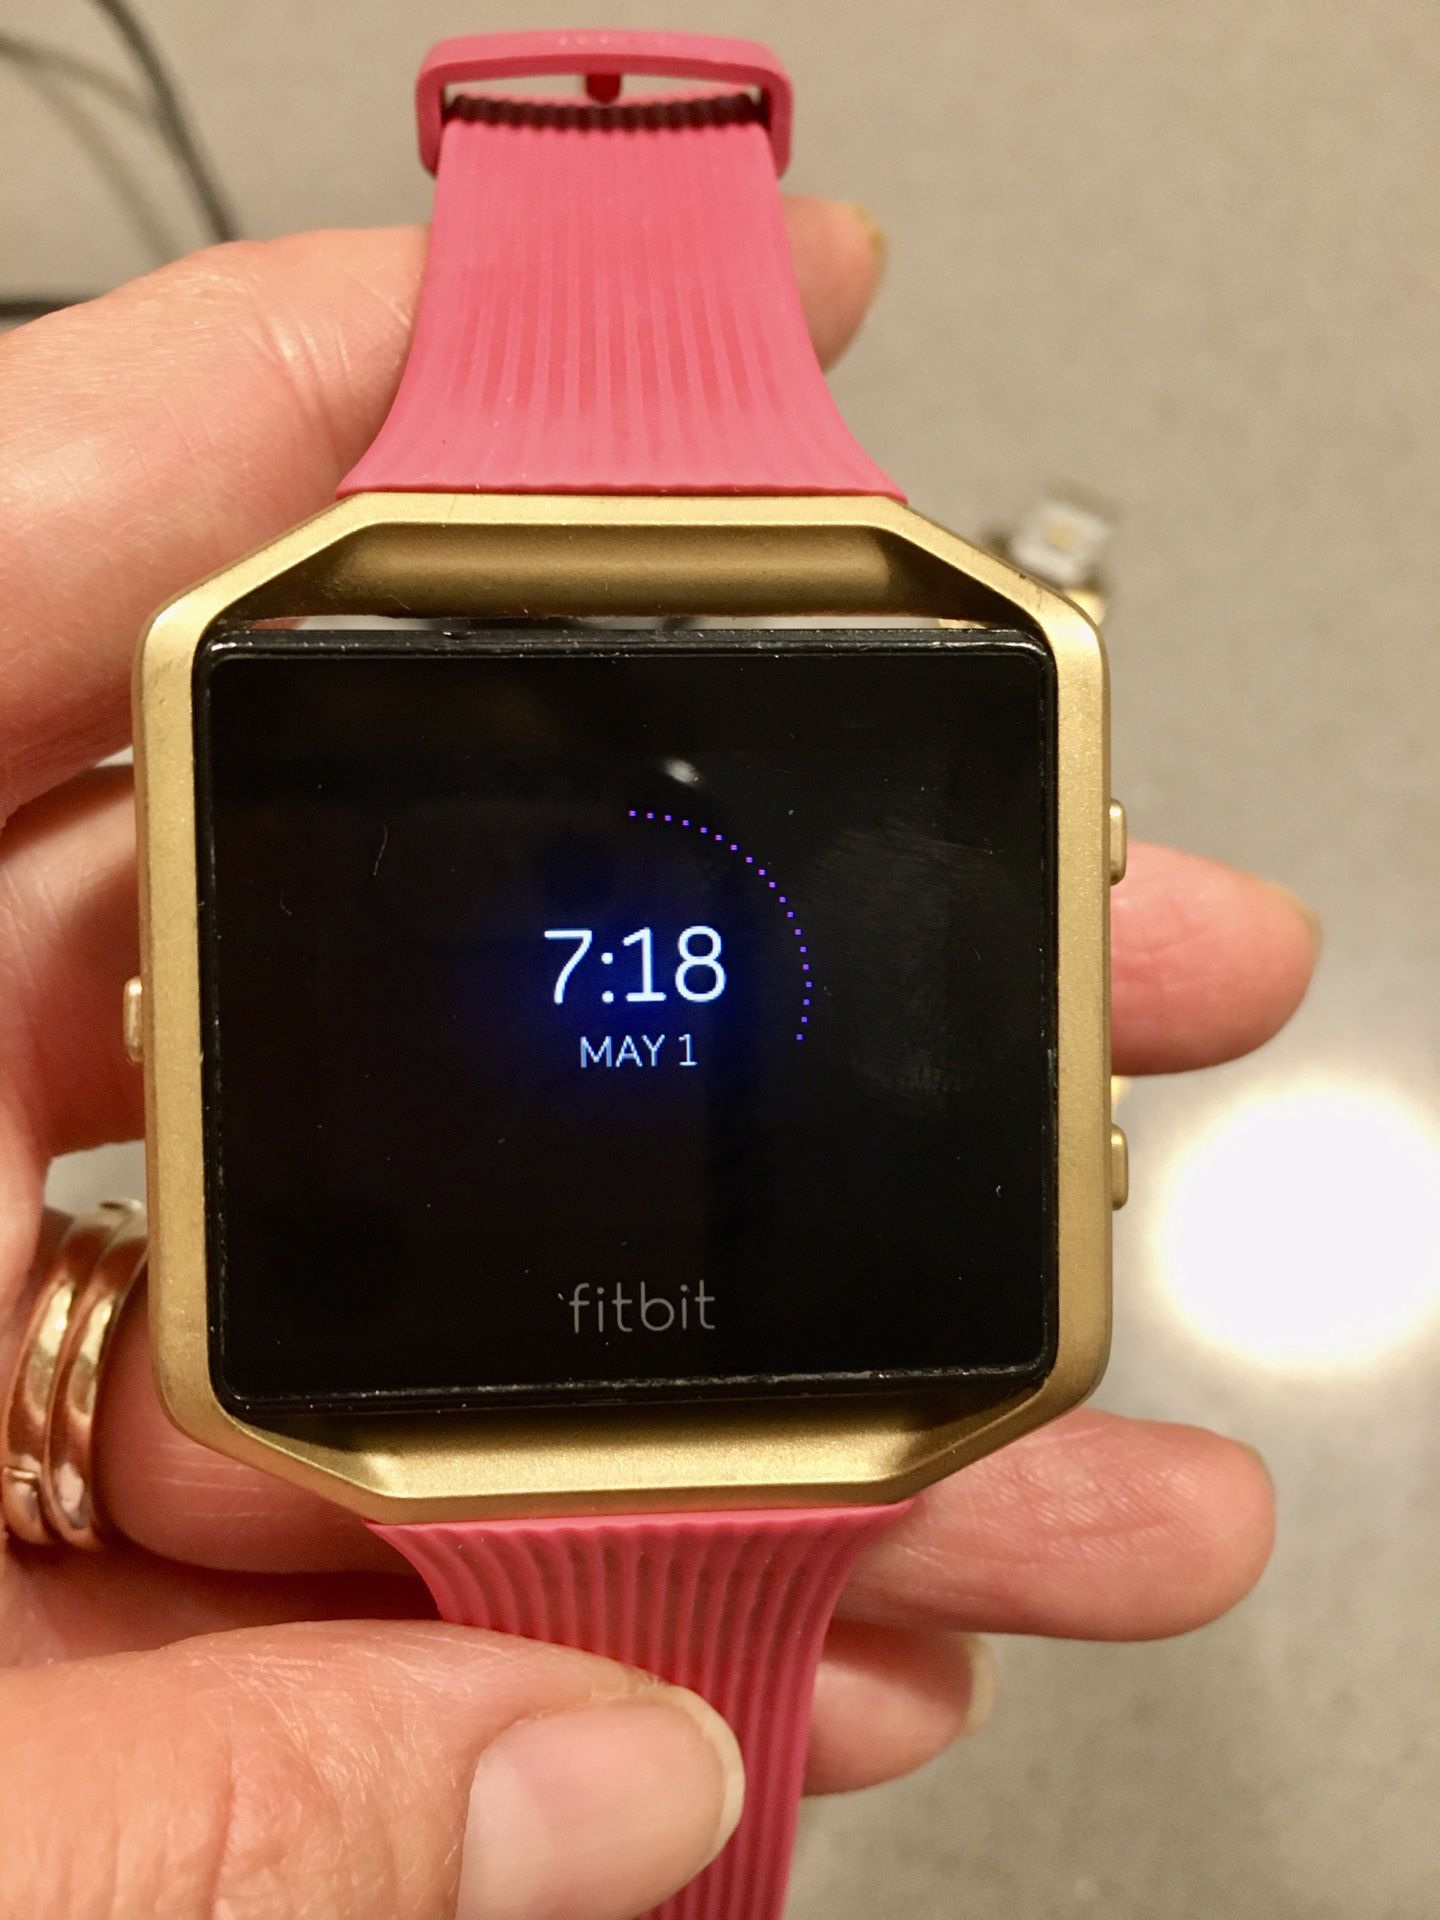 HIS&HERS FitBit Blaze HR STEP Counter w/ extra bands